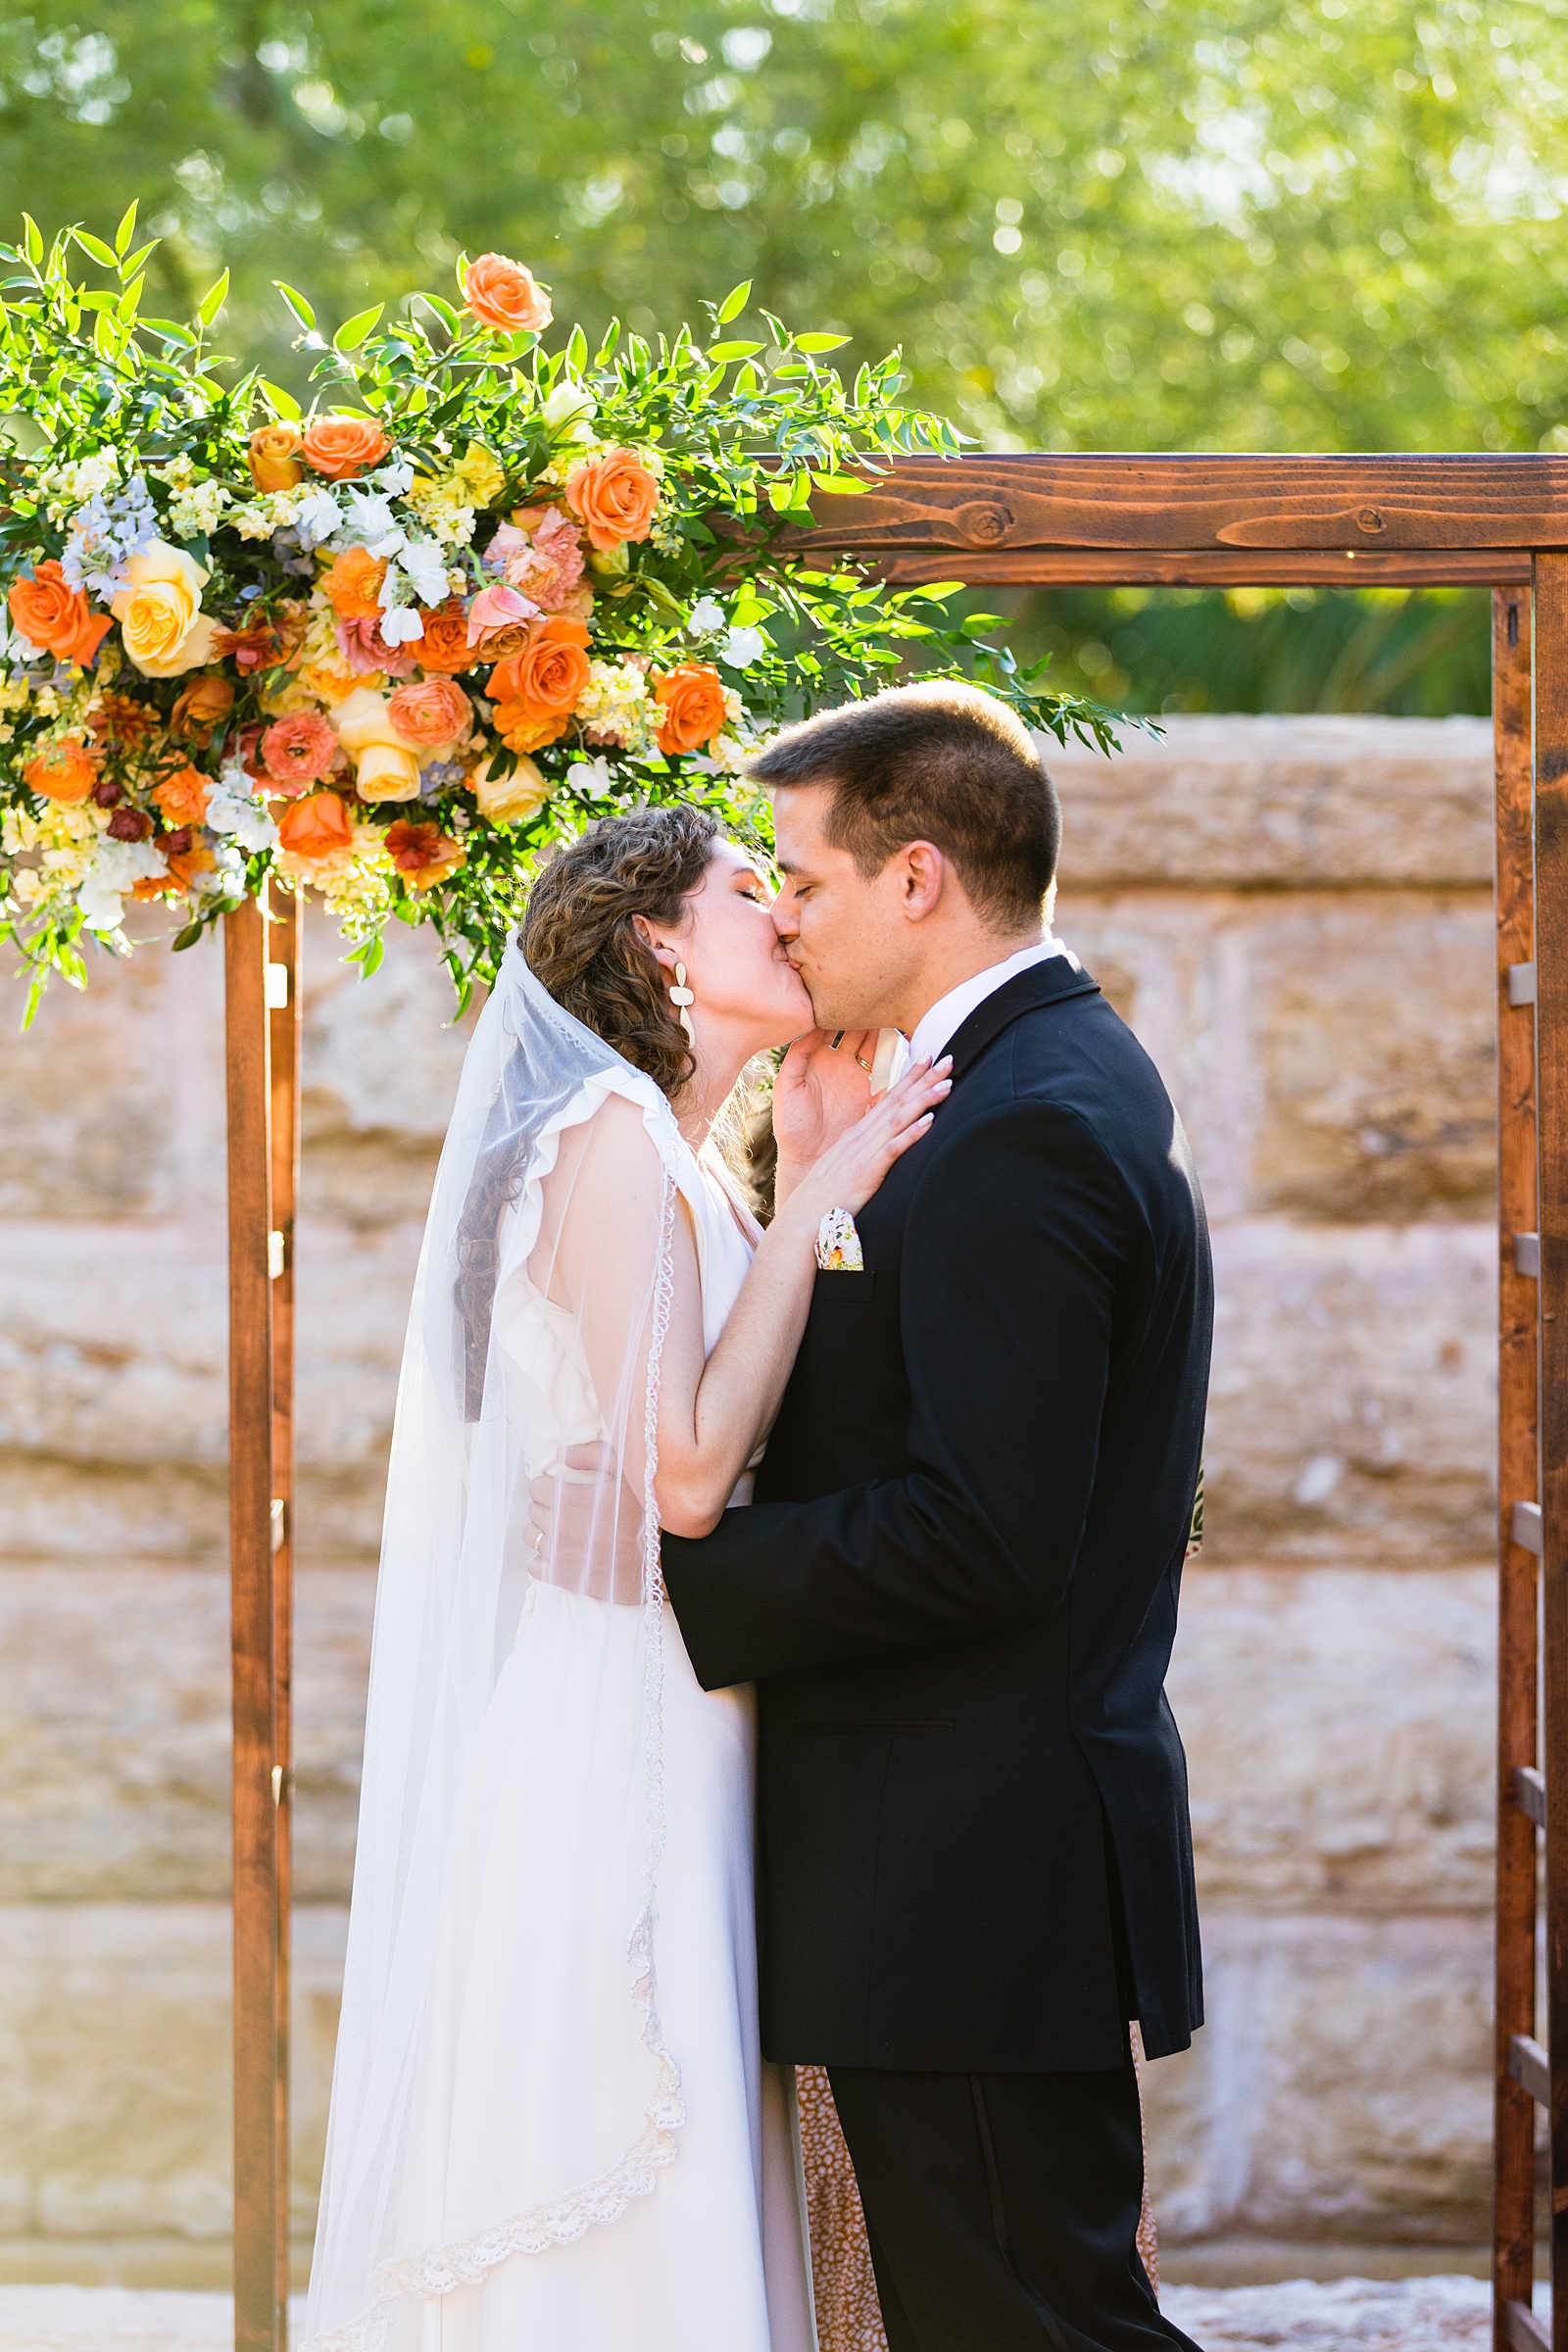 Bride and groom share their first kiss during their wedding ceremony at Arizona Historical Society by Arizona wedding photographer PMA Photography.